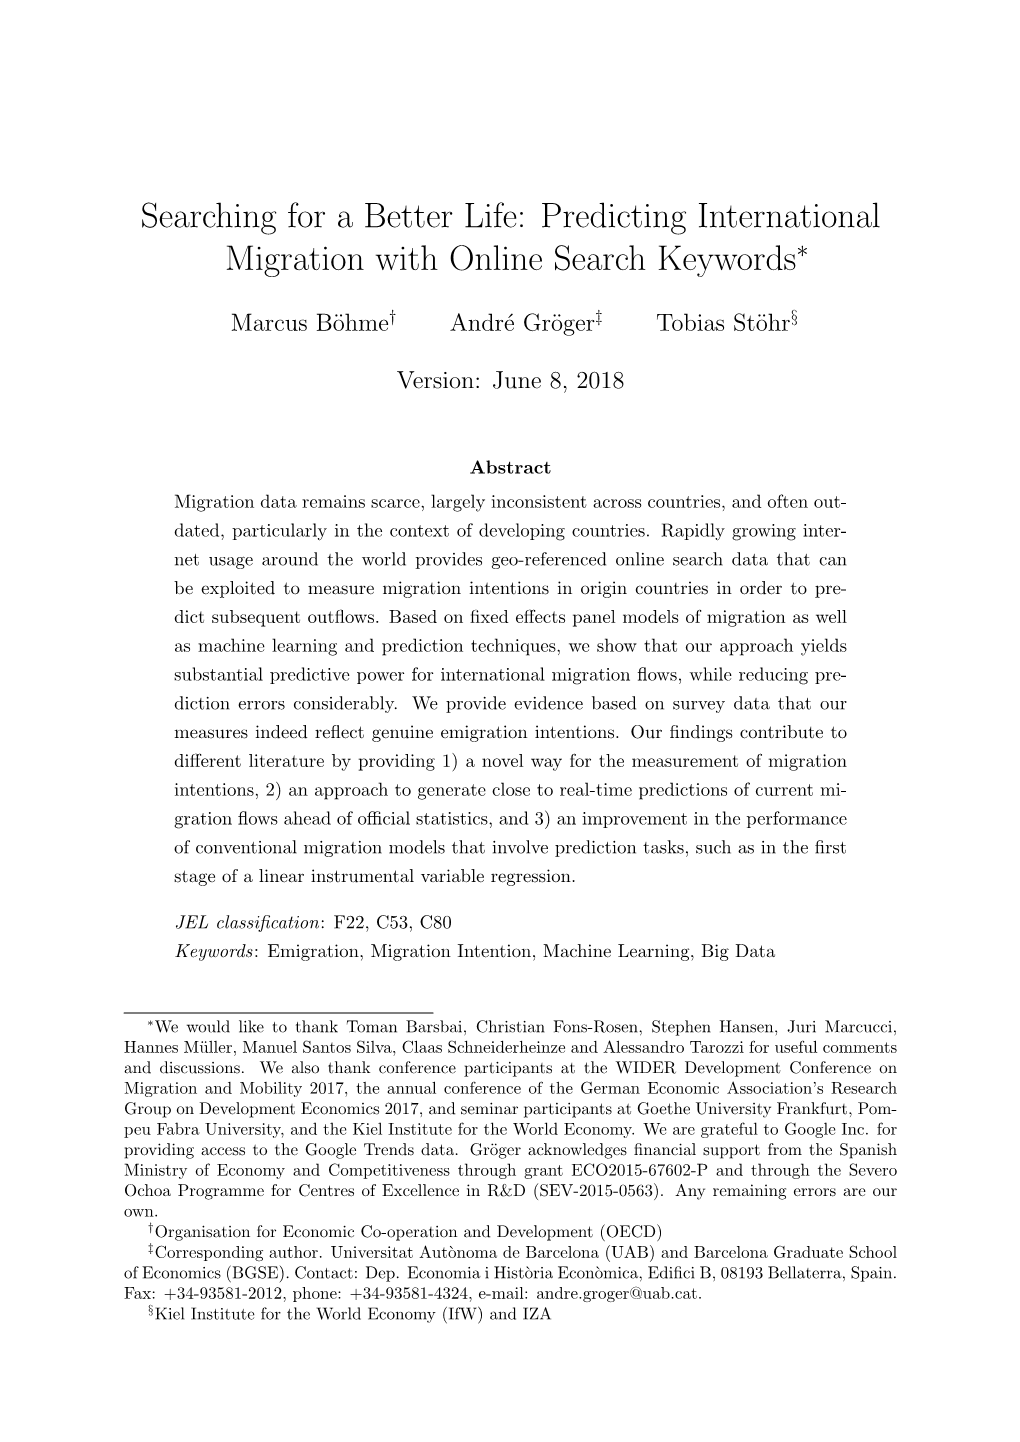 Predicting International Migration with Online Search Keywords∗